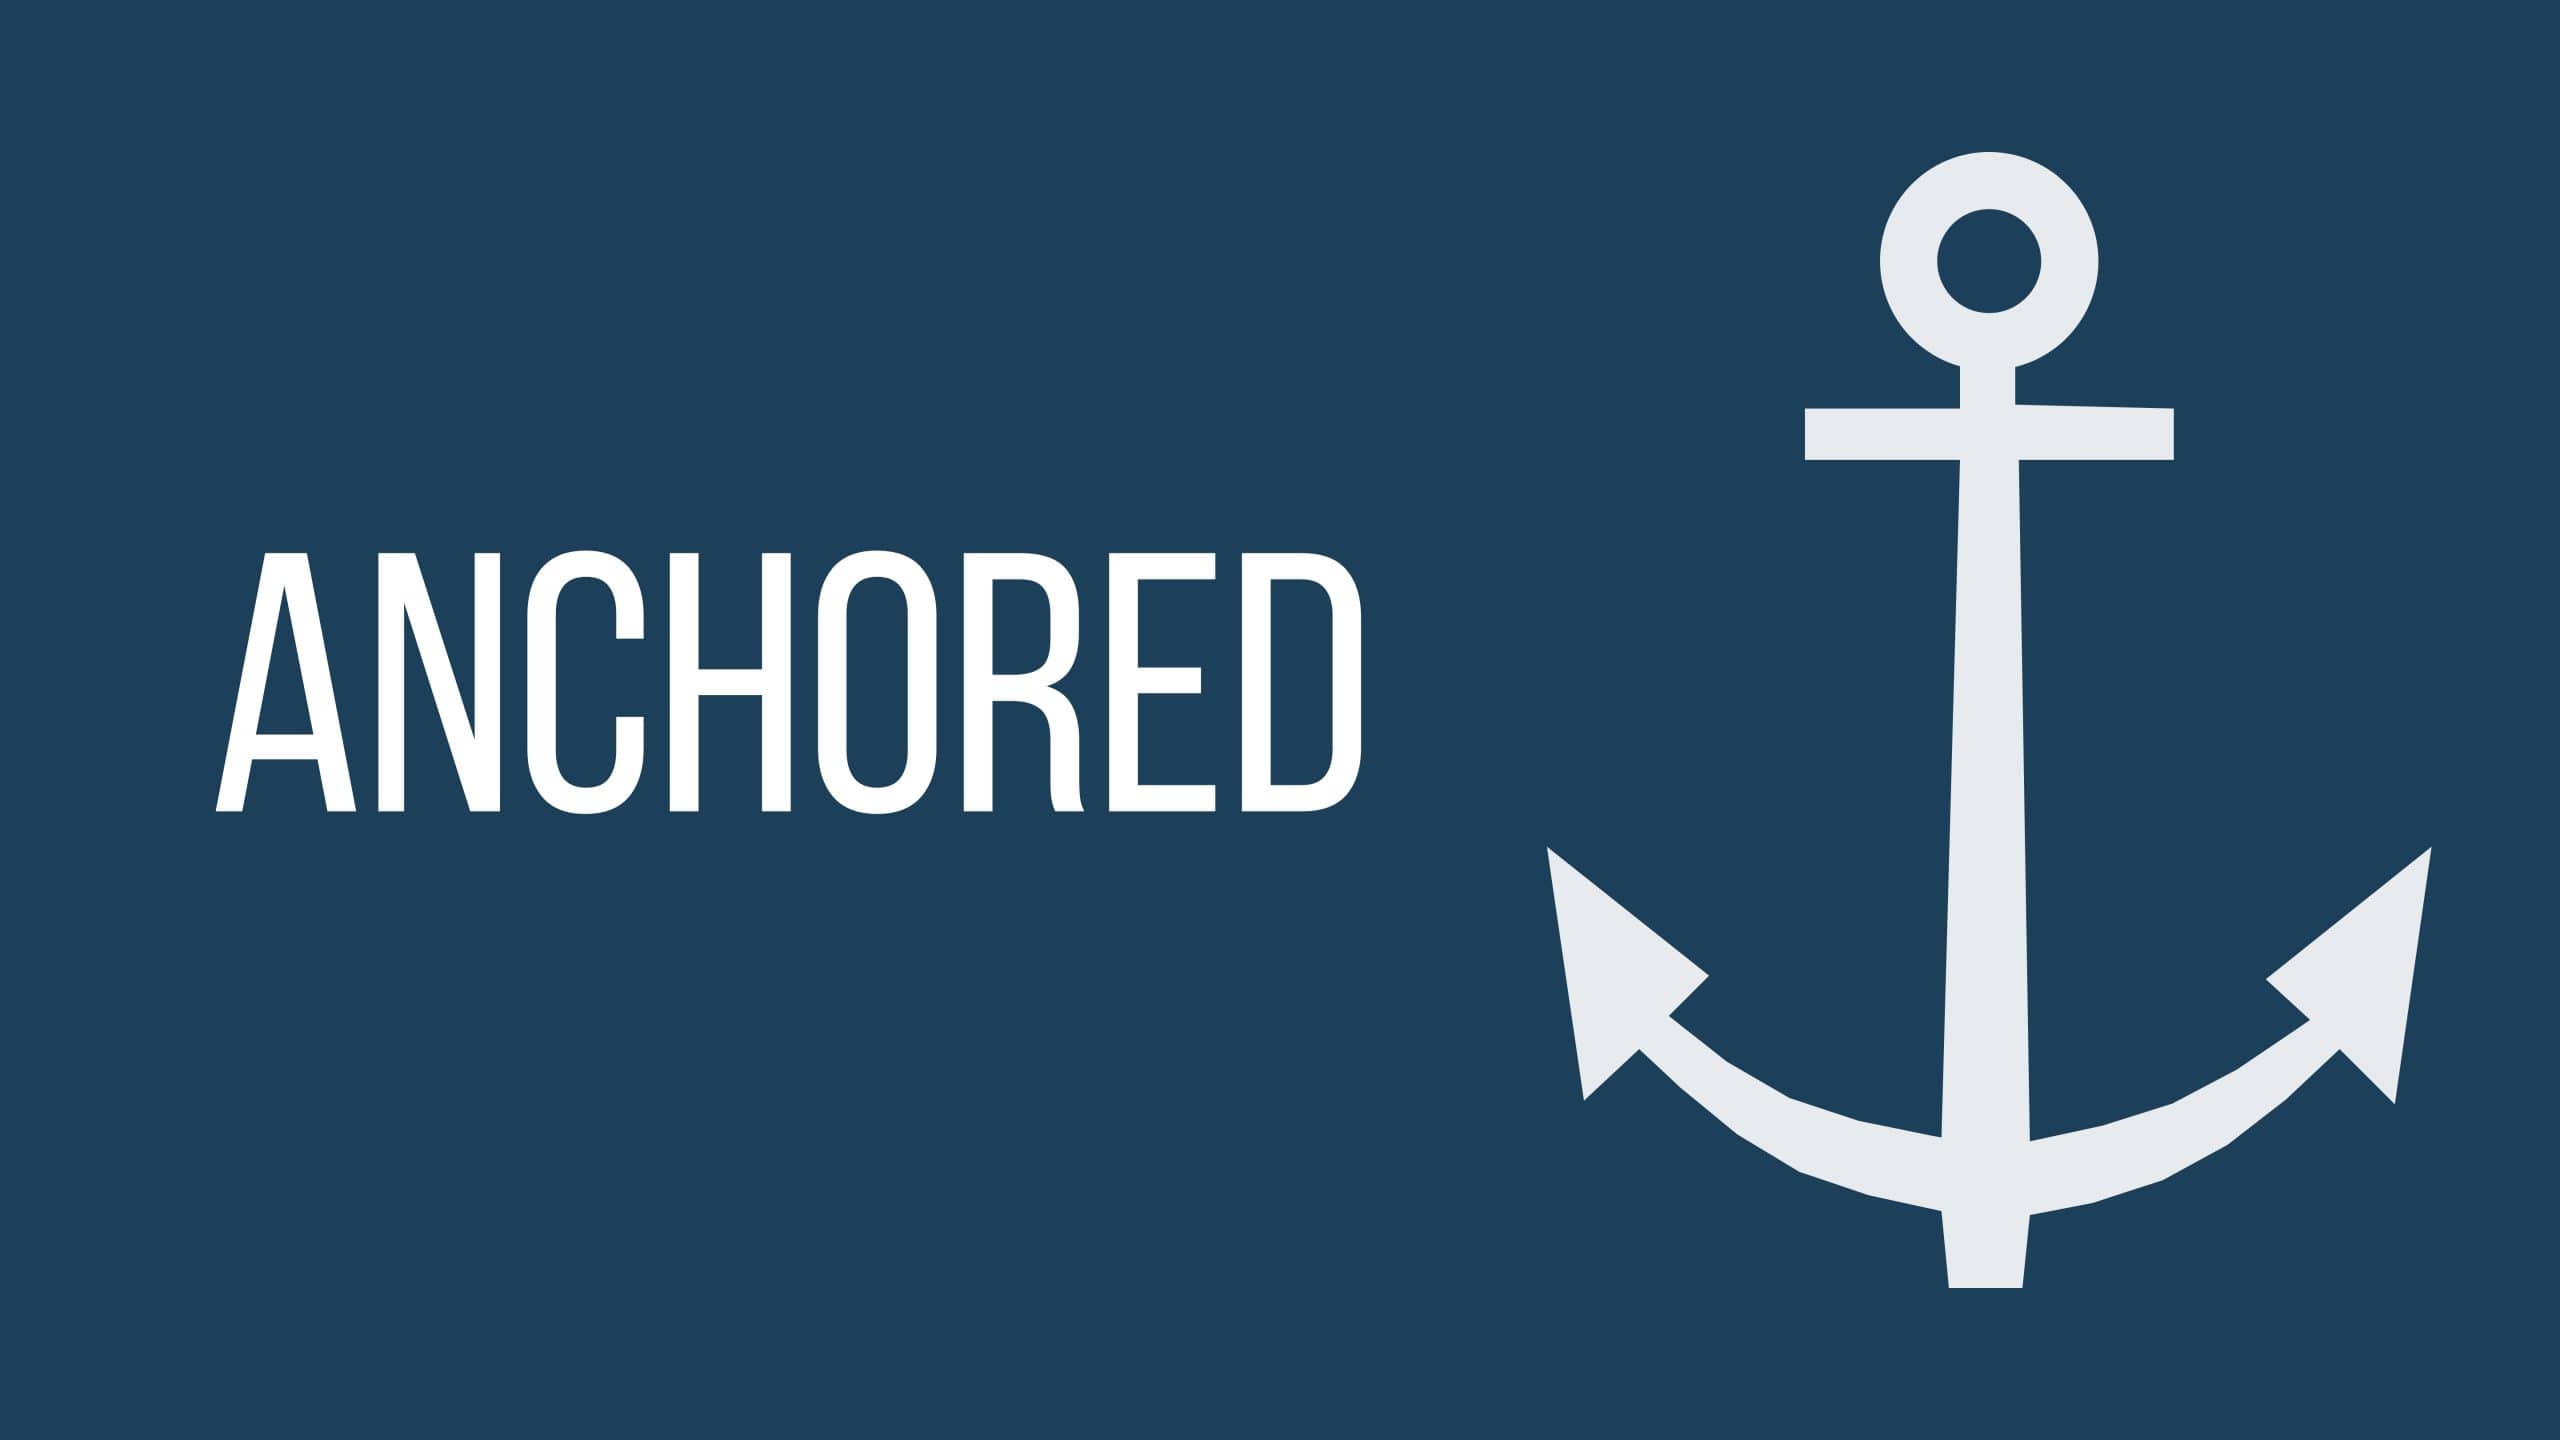 Anchored in Christ Image